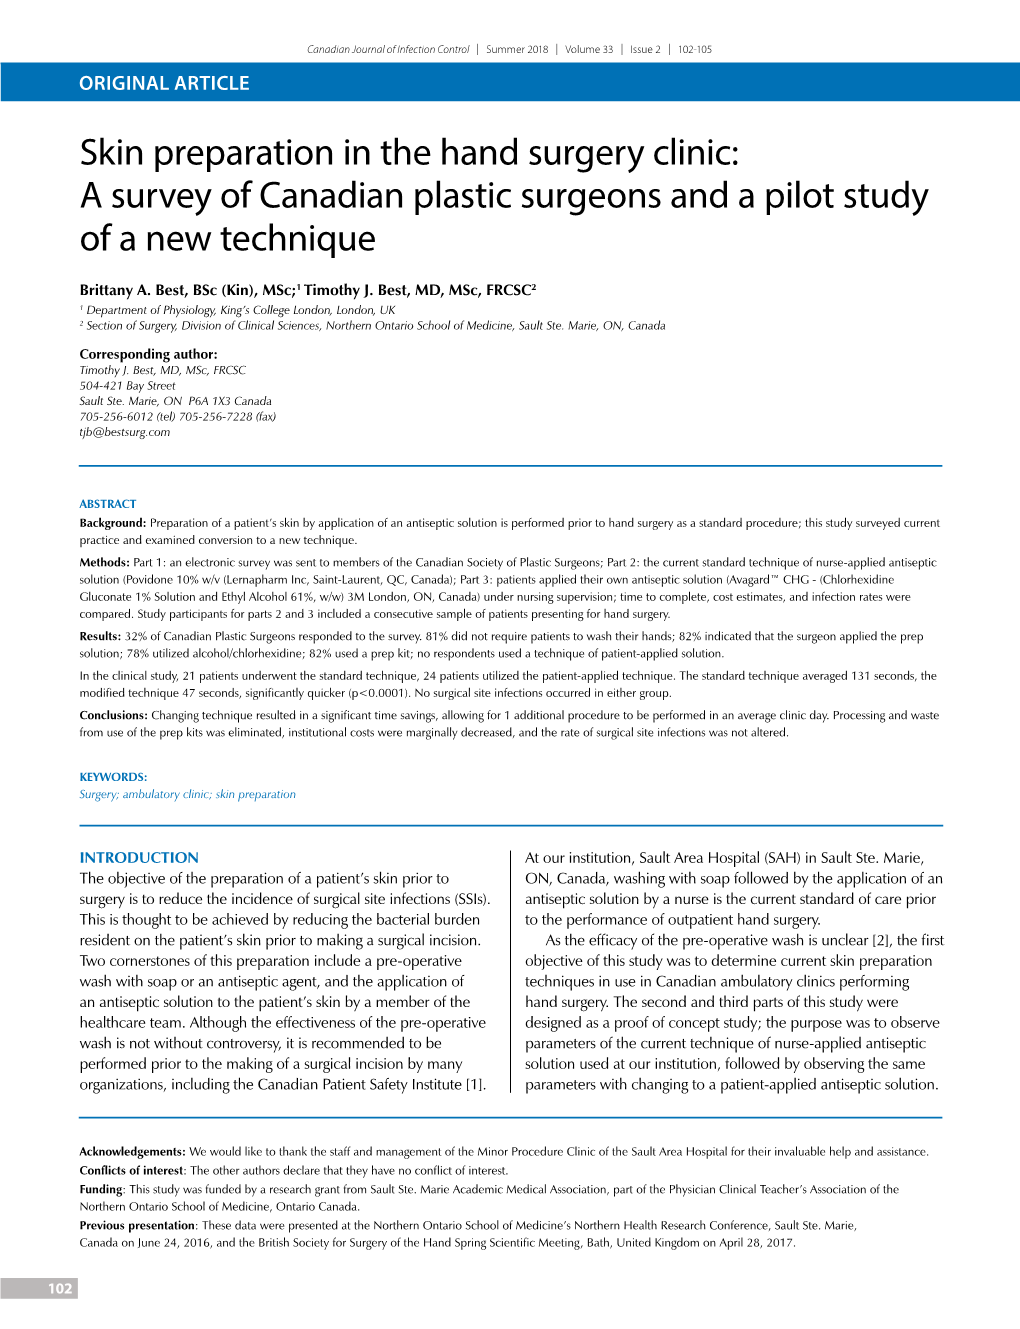 Skin Preparation in the Hand Surgery Clinic: a Survey of Canadian Plastic Surgeons and a Pilot Study of a New Technique